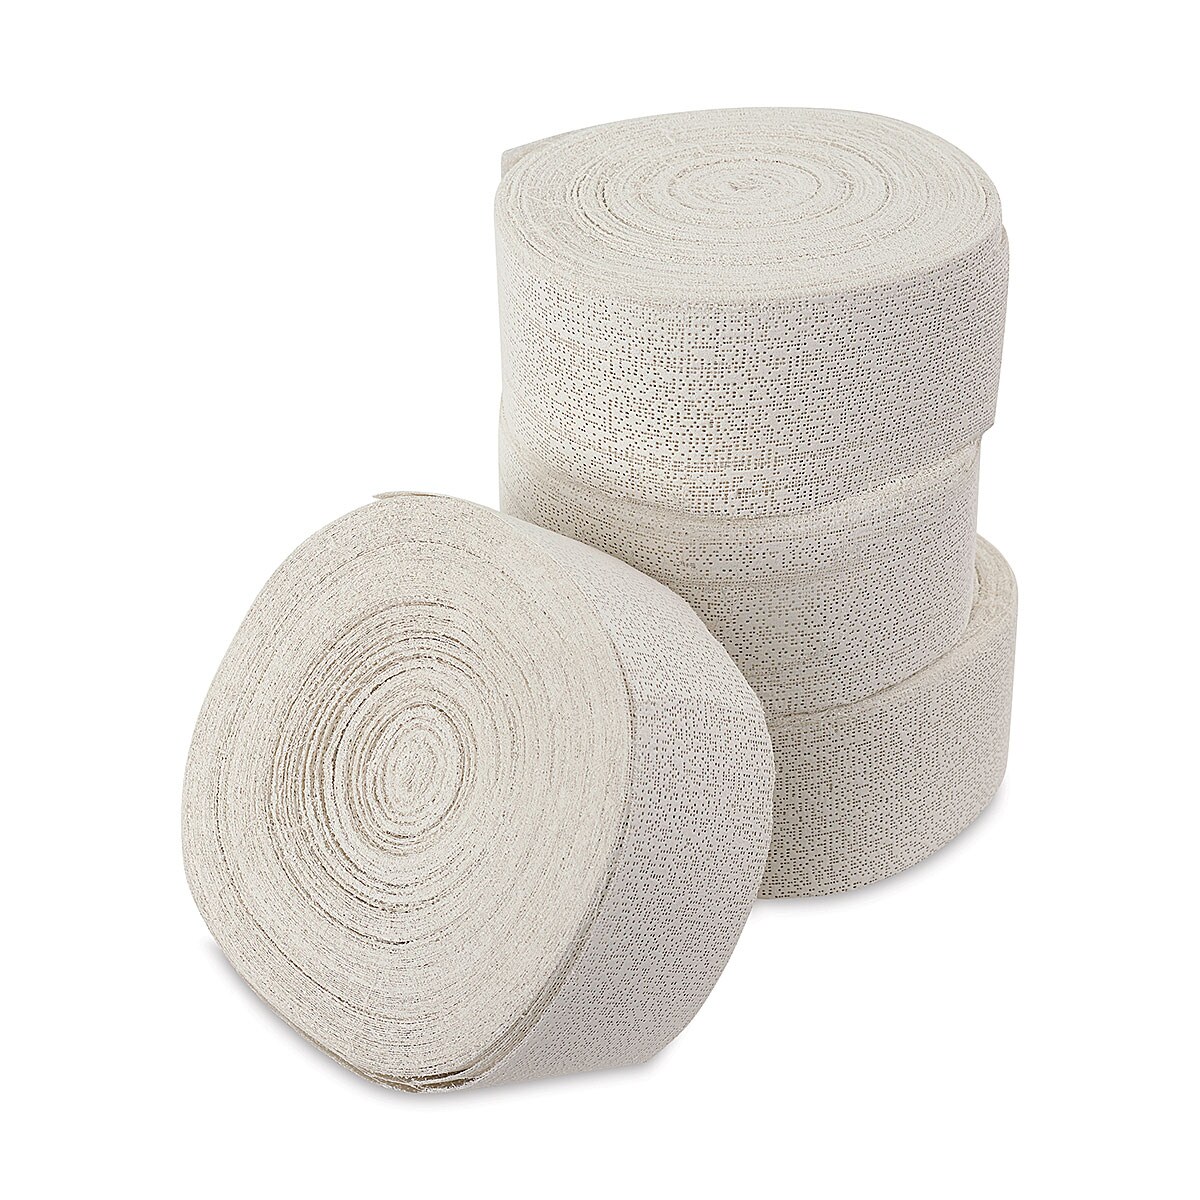 Blick Plaster Cloth- 4- 26 lb Roll, Approximately 250 yds